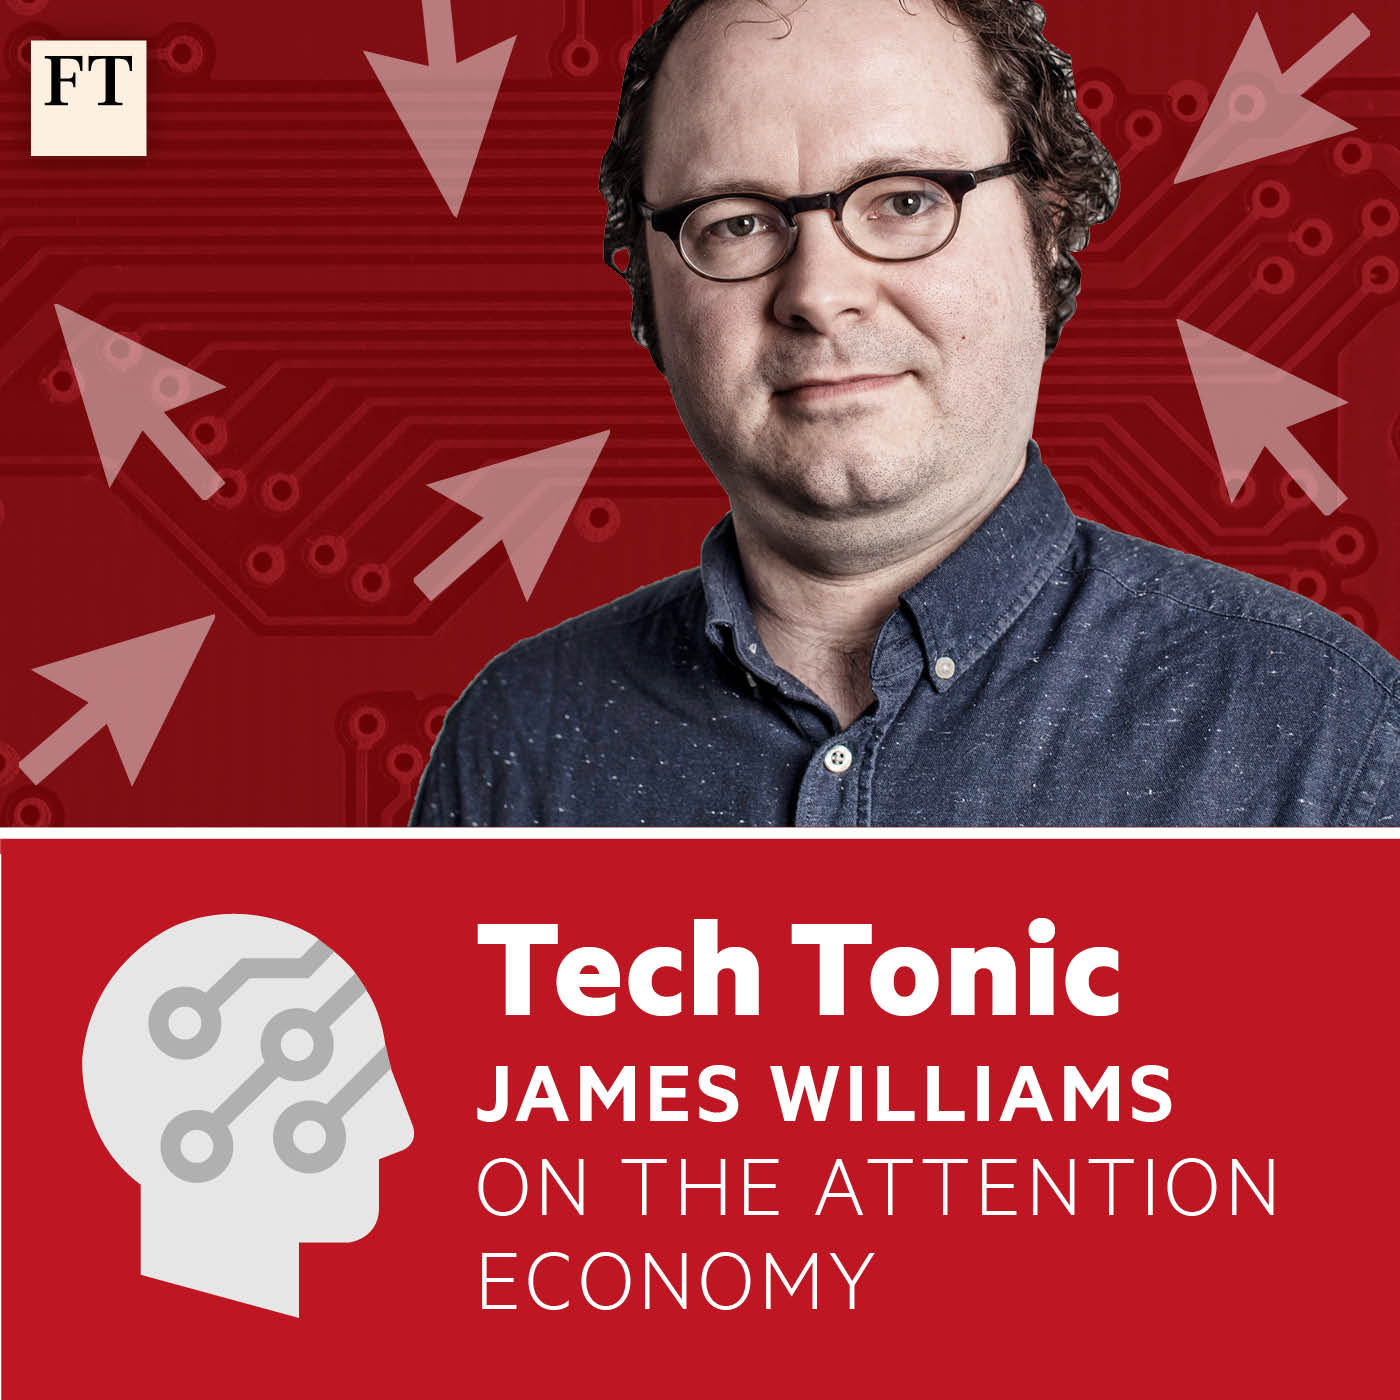 James Williams on the attention economy